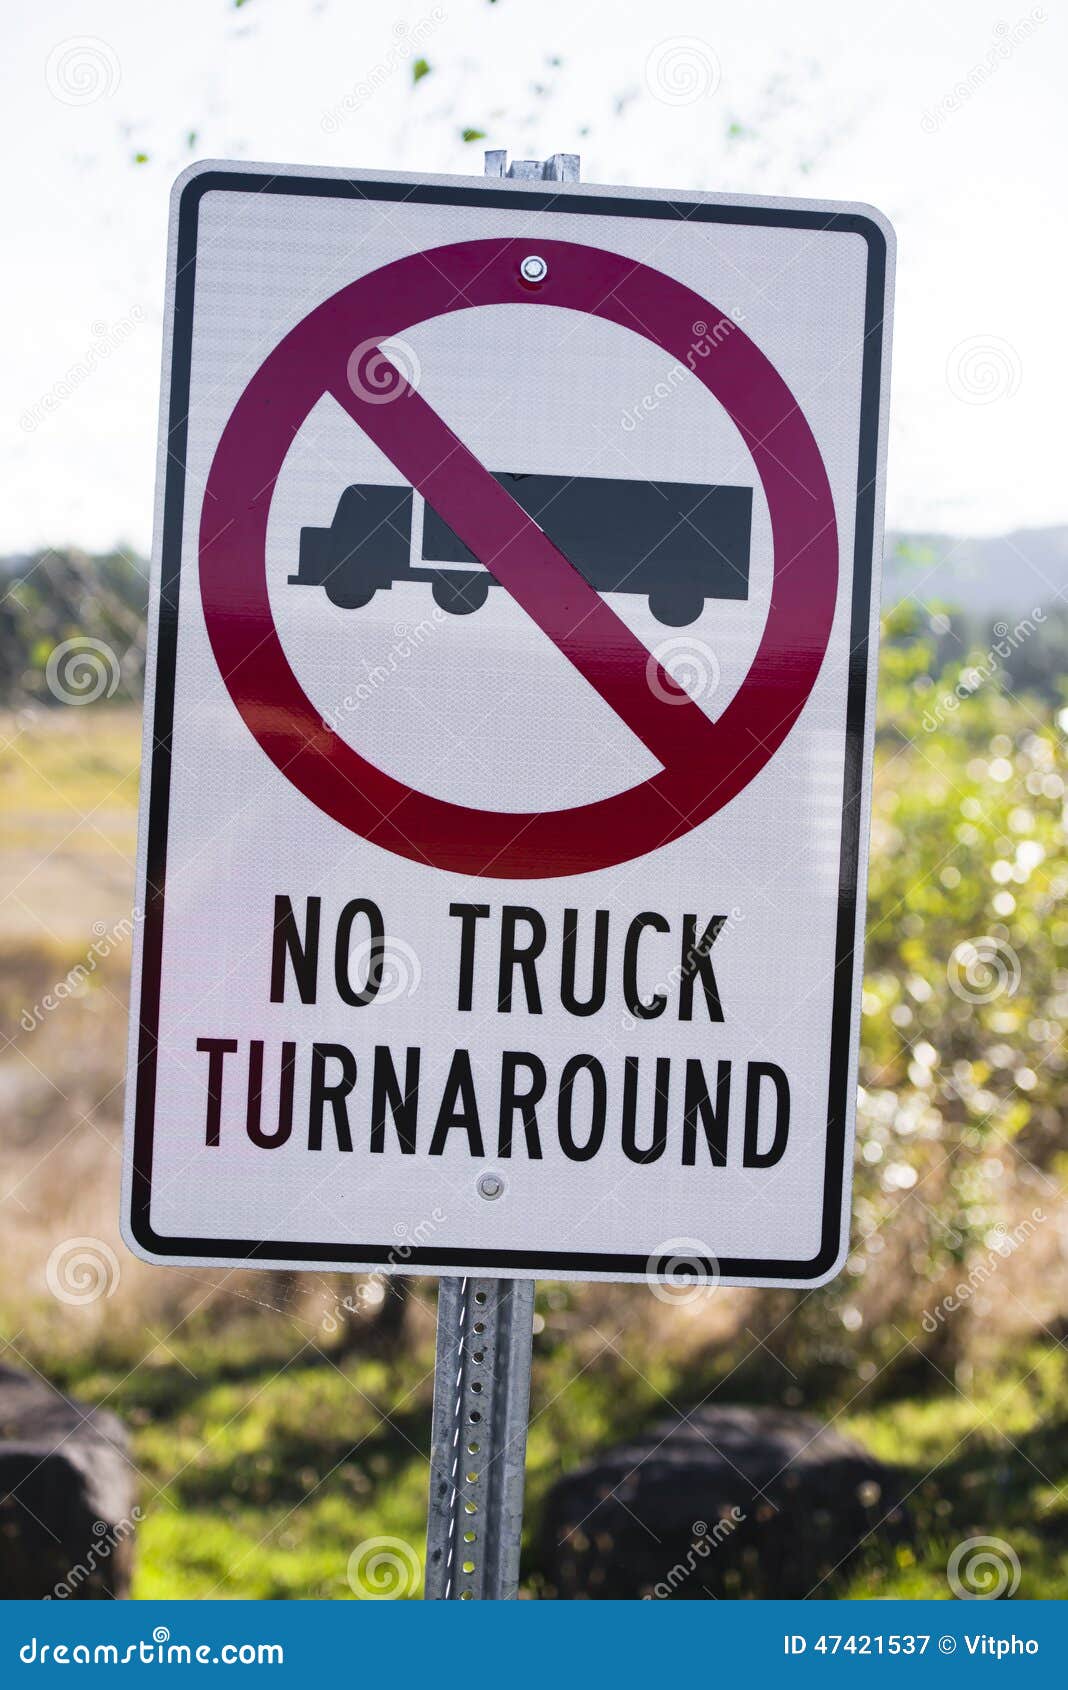 No Truck Turn Arounds 9" x 6" Metal Sign 